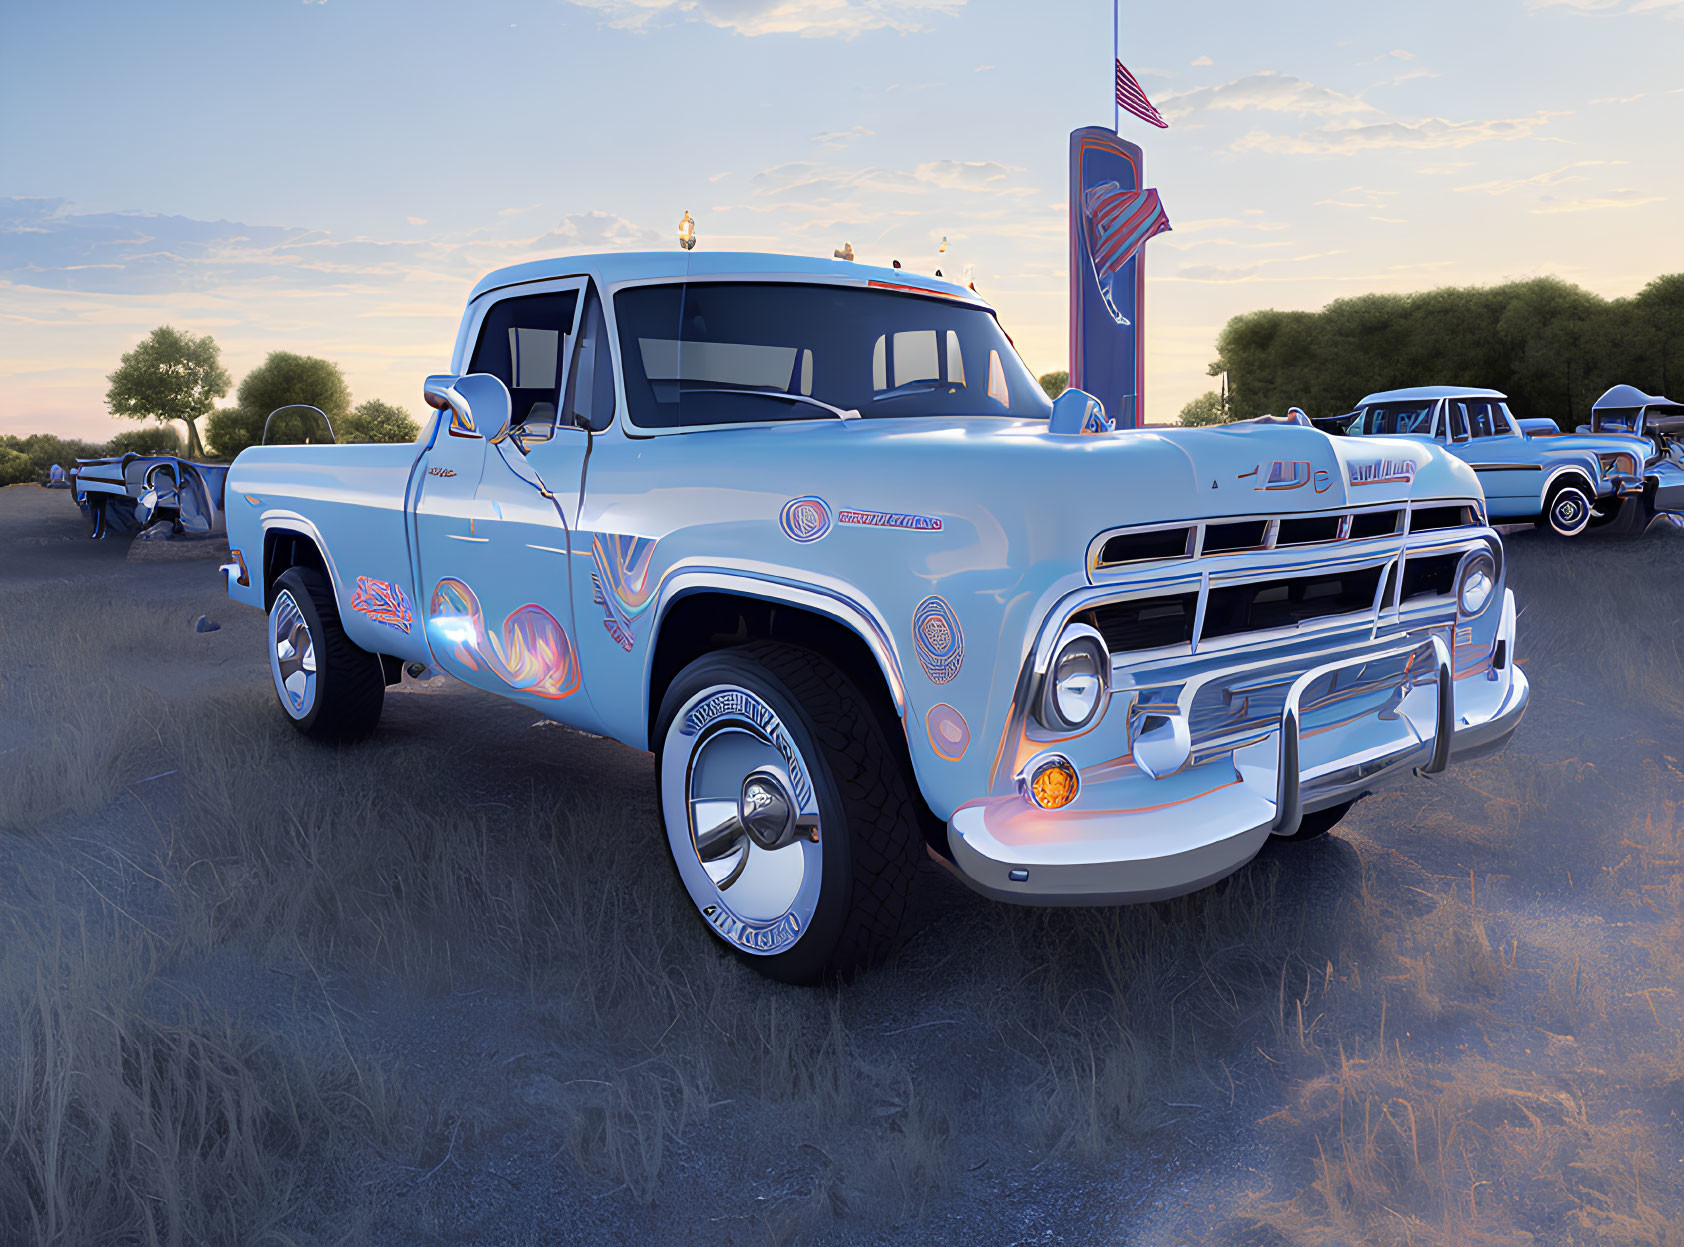 Vintage White Pickup Truck with Blue Neon Underglow at Twilight Car Show